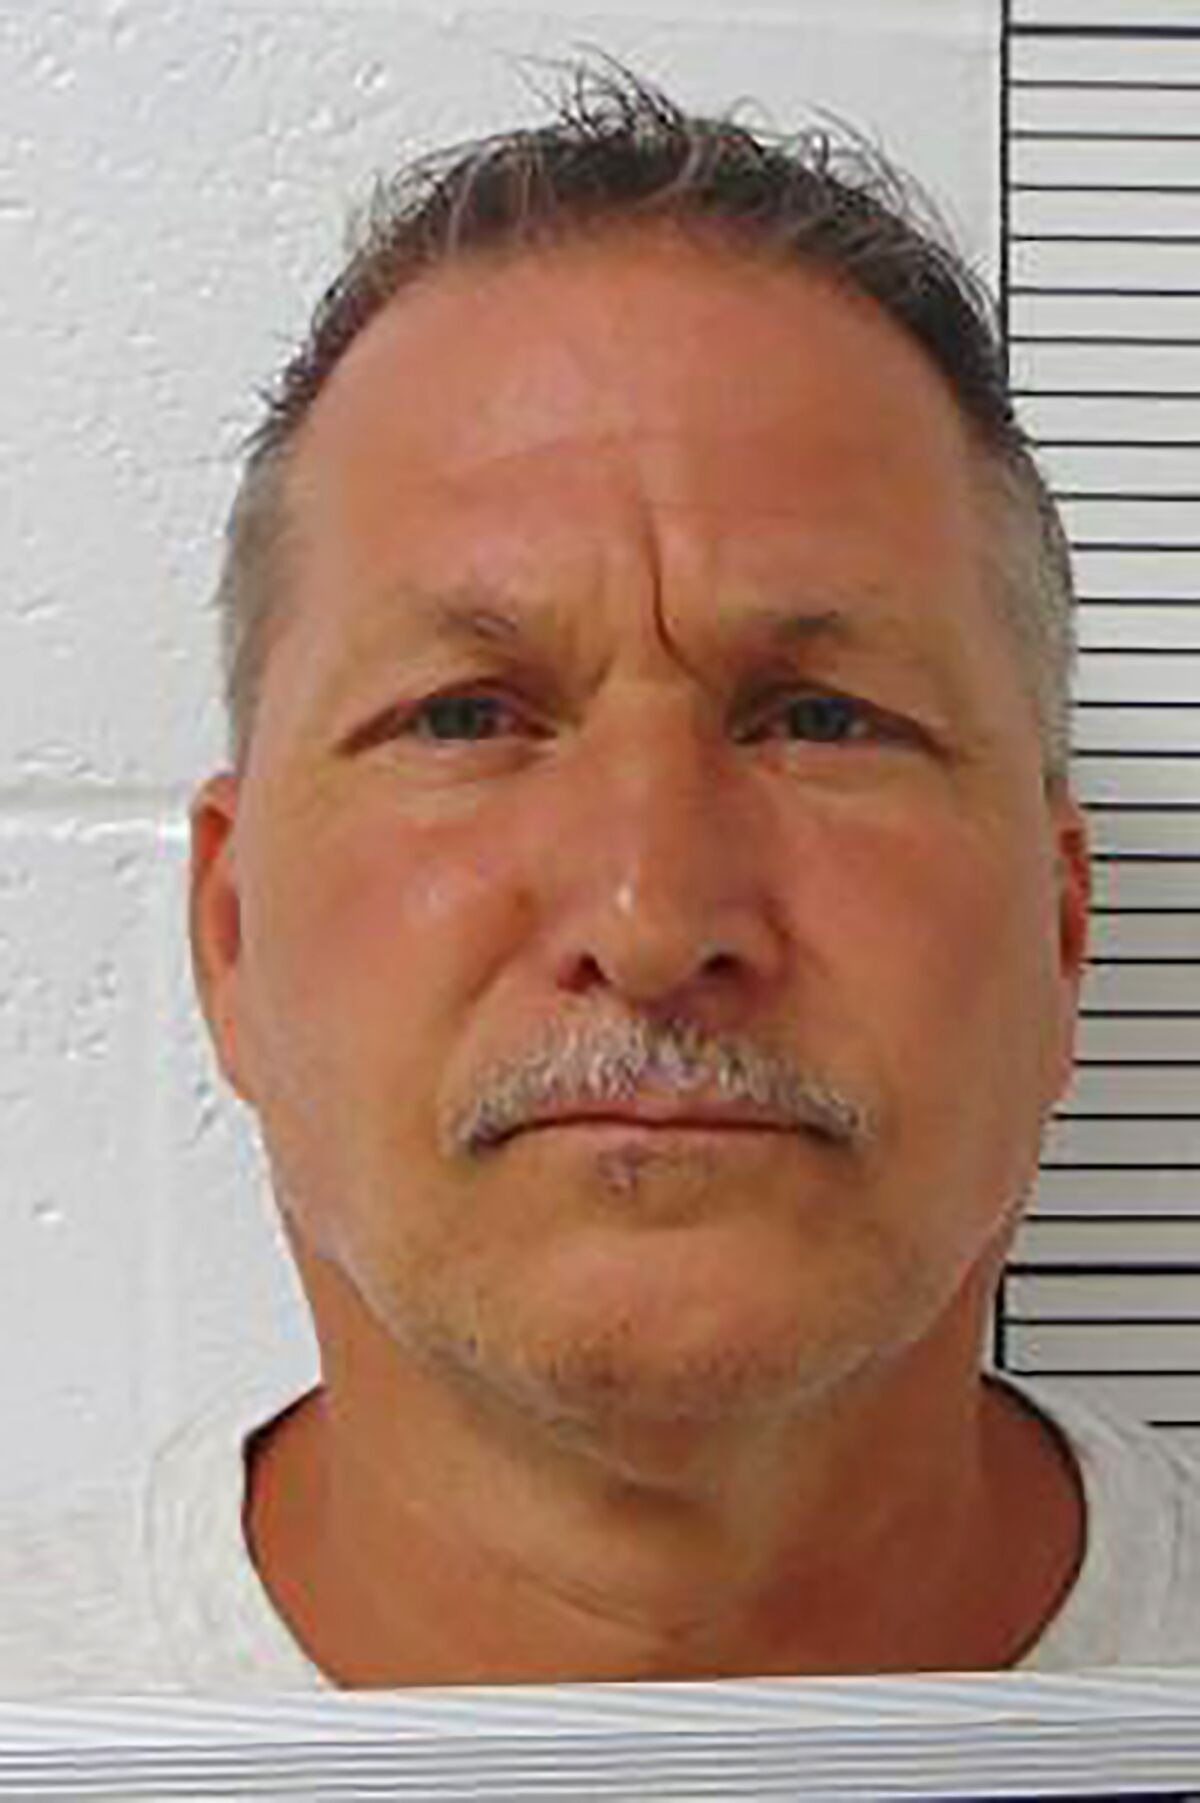 FILE This undated photo provided by the Missouri Department of Corrections shows Carman Deck. Missouri inmate Carman Deck is scheduled to die by injection on Tuesday, May 3, 2022, for killing a couple during a robbery at their eastern Missouri home in 1996. Executions have become increasingly uncommon in the U.S., with just 11 last year and four so far in 2022. That's down from a peak of 98 in 1998. Photo provided by the Missouri Department of Corrections. (Missouri Department of Corrections via AP File)